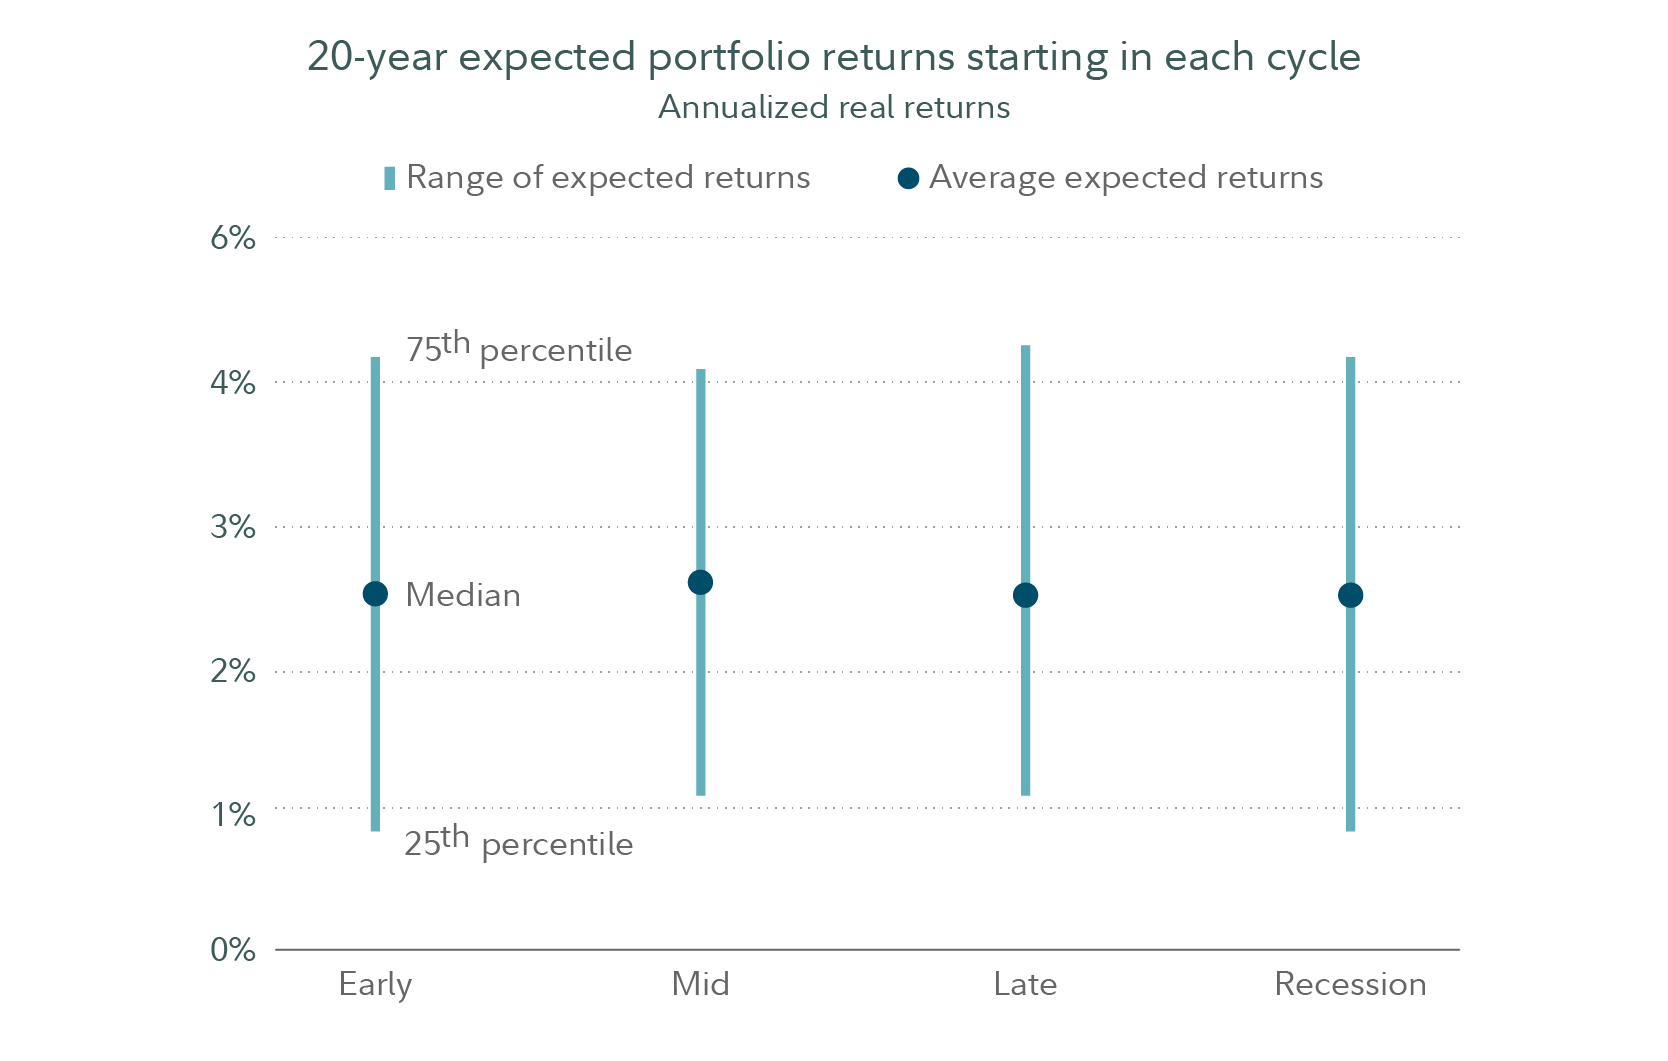 Looking at the 20-year expected portfolio returns starting in each cycle, both the range of expected returns and the average expected returns show little variance. 